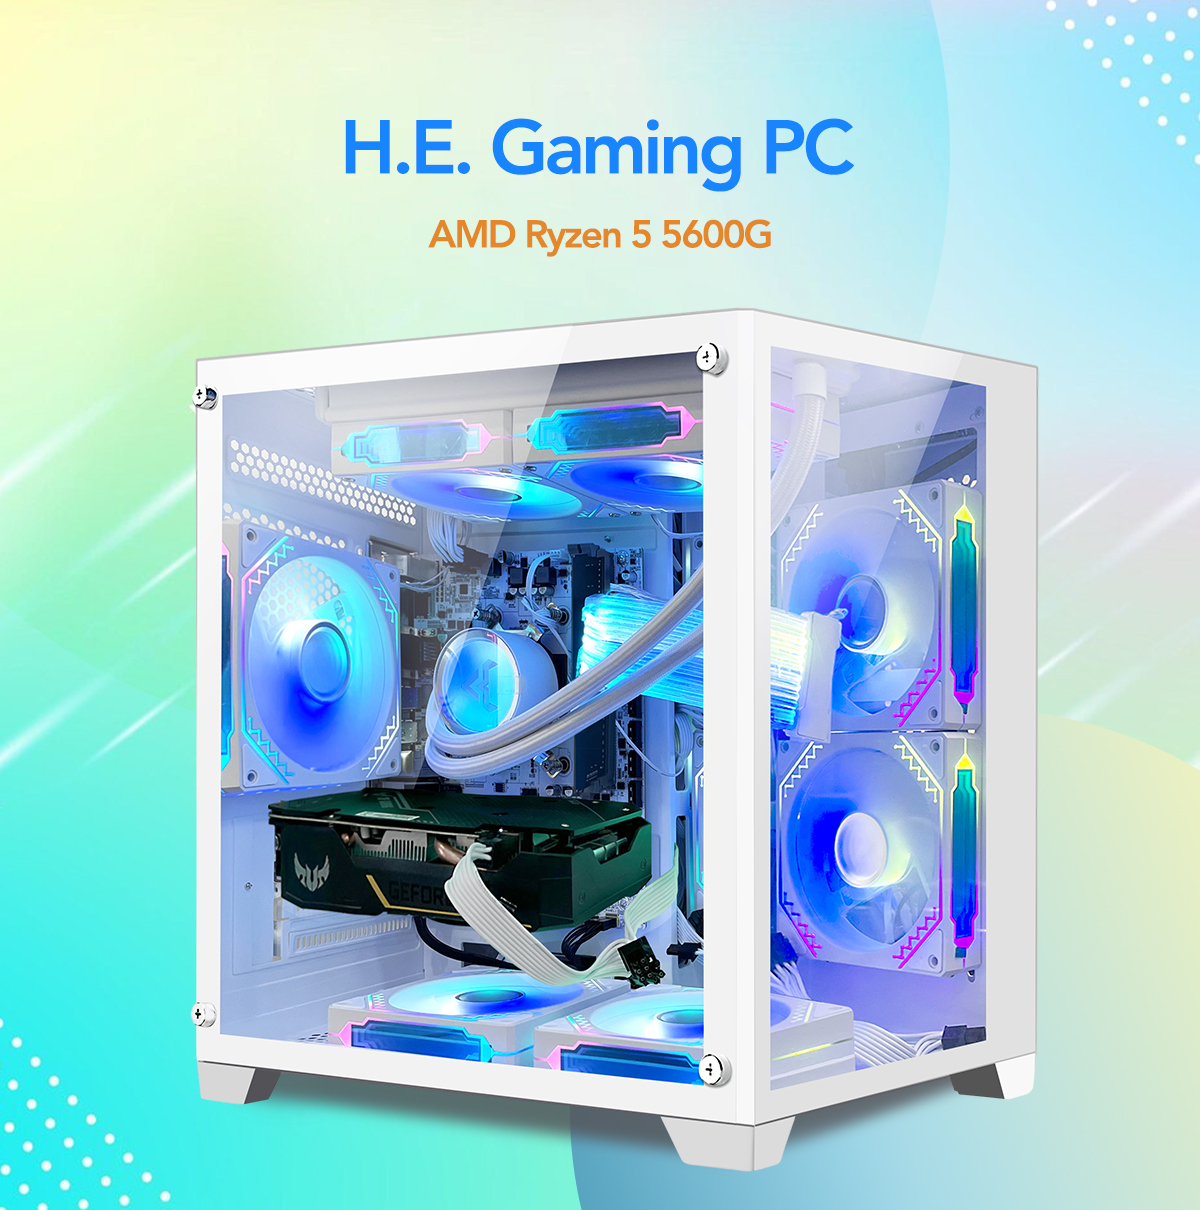 TORRE GAMING GAME RYZEN 5 4500 500 GB SSD 16 GB RAM NVIDIA RTX3060 12GB +  CABLE